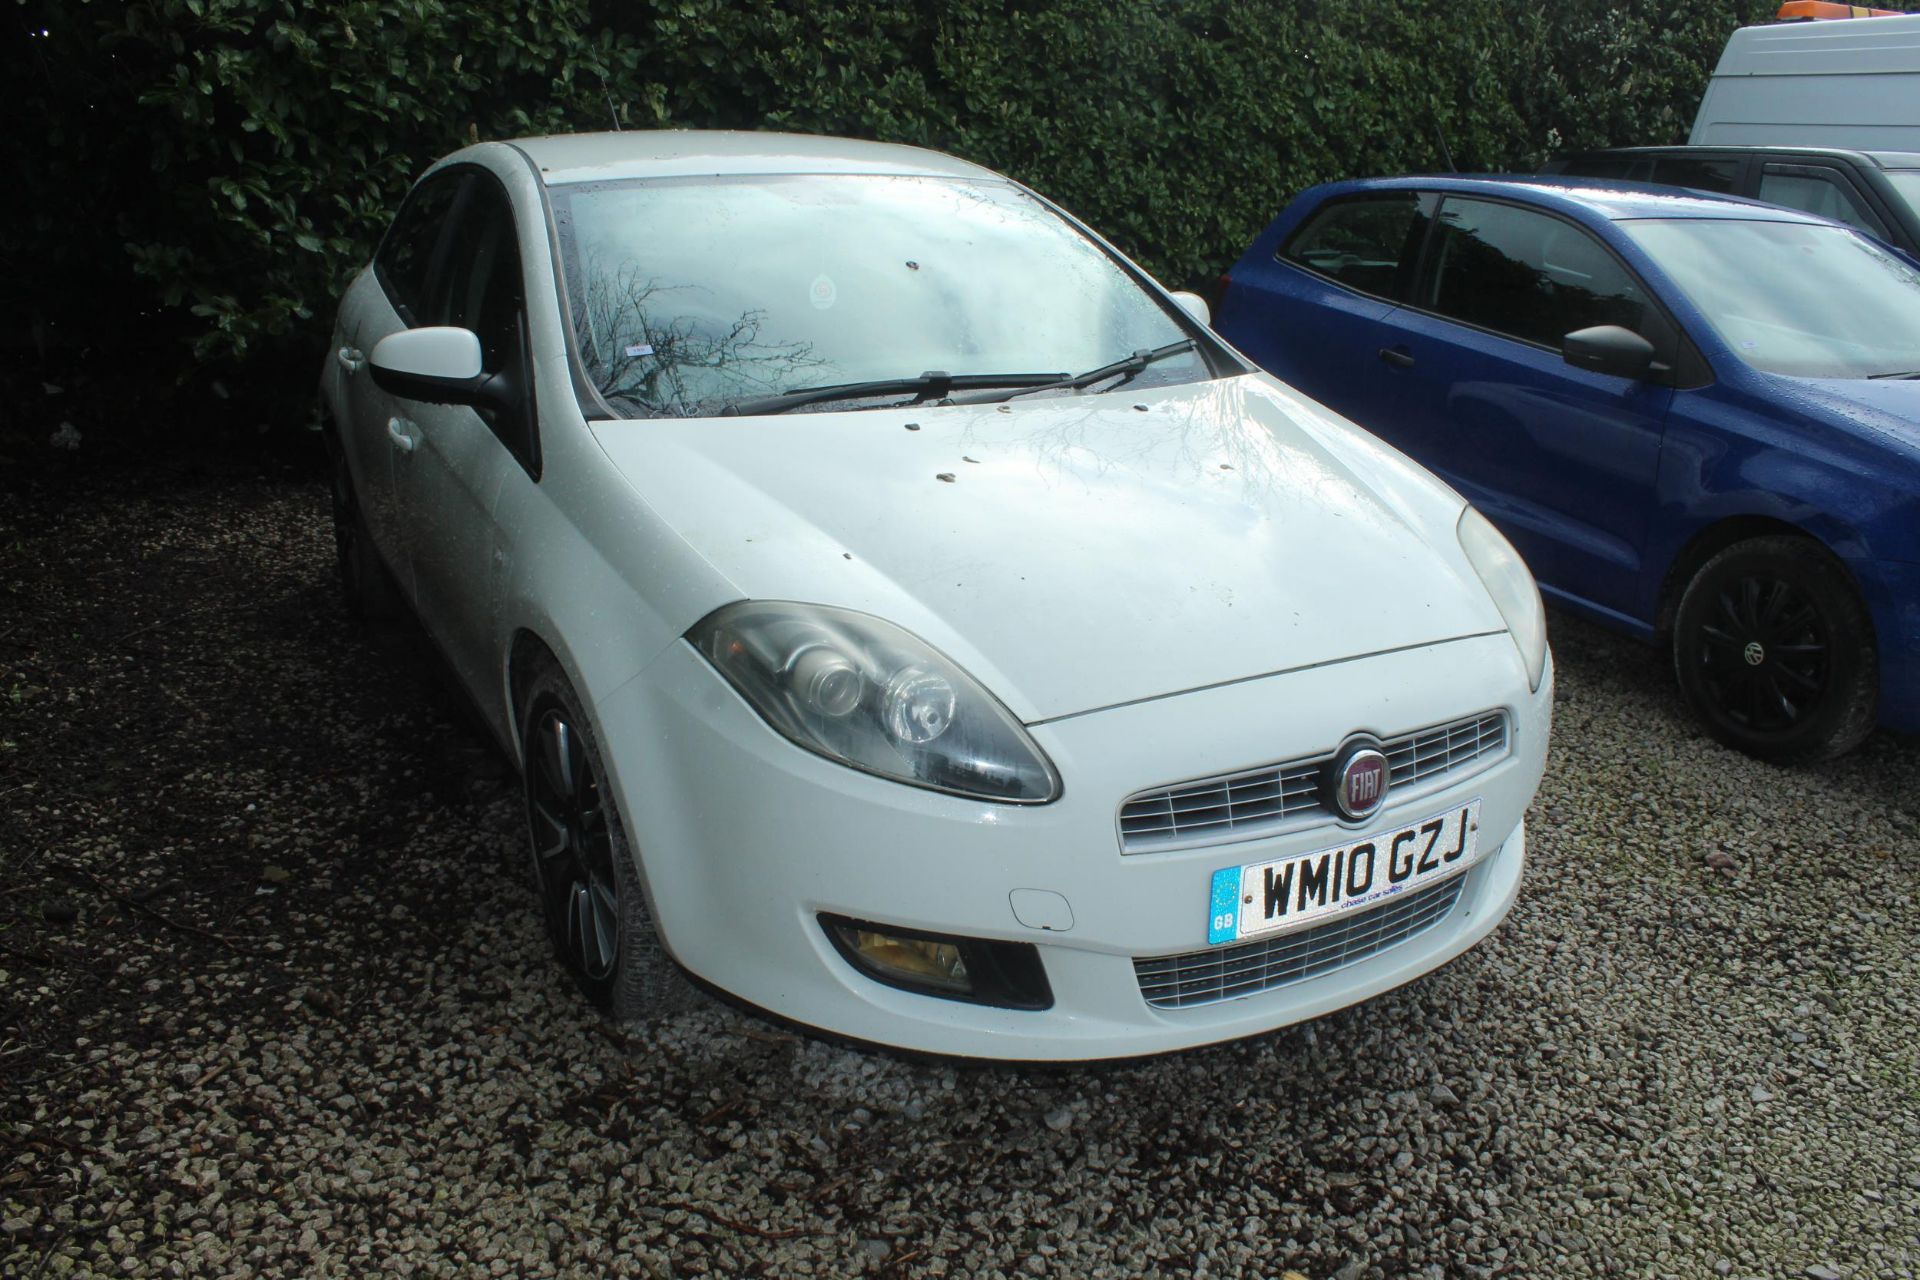 FIAT BRAVO ACTIVE WN10GZJ 5 DOOR HATCHBACK MOT JUNE 24 APPROX 113276 MILES THERE IS A PROBLEM WITH - Image 2 of 3